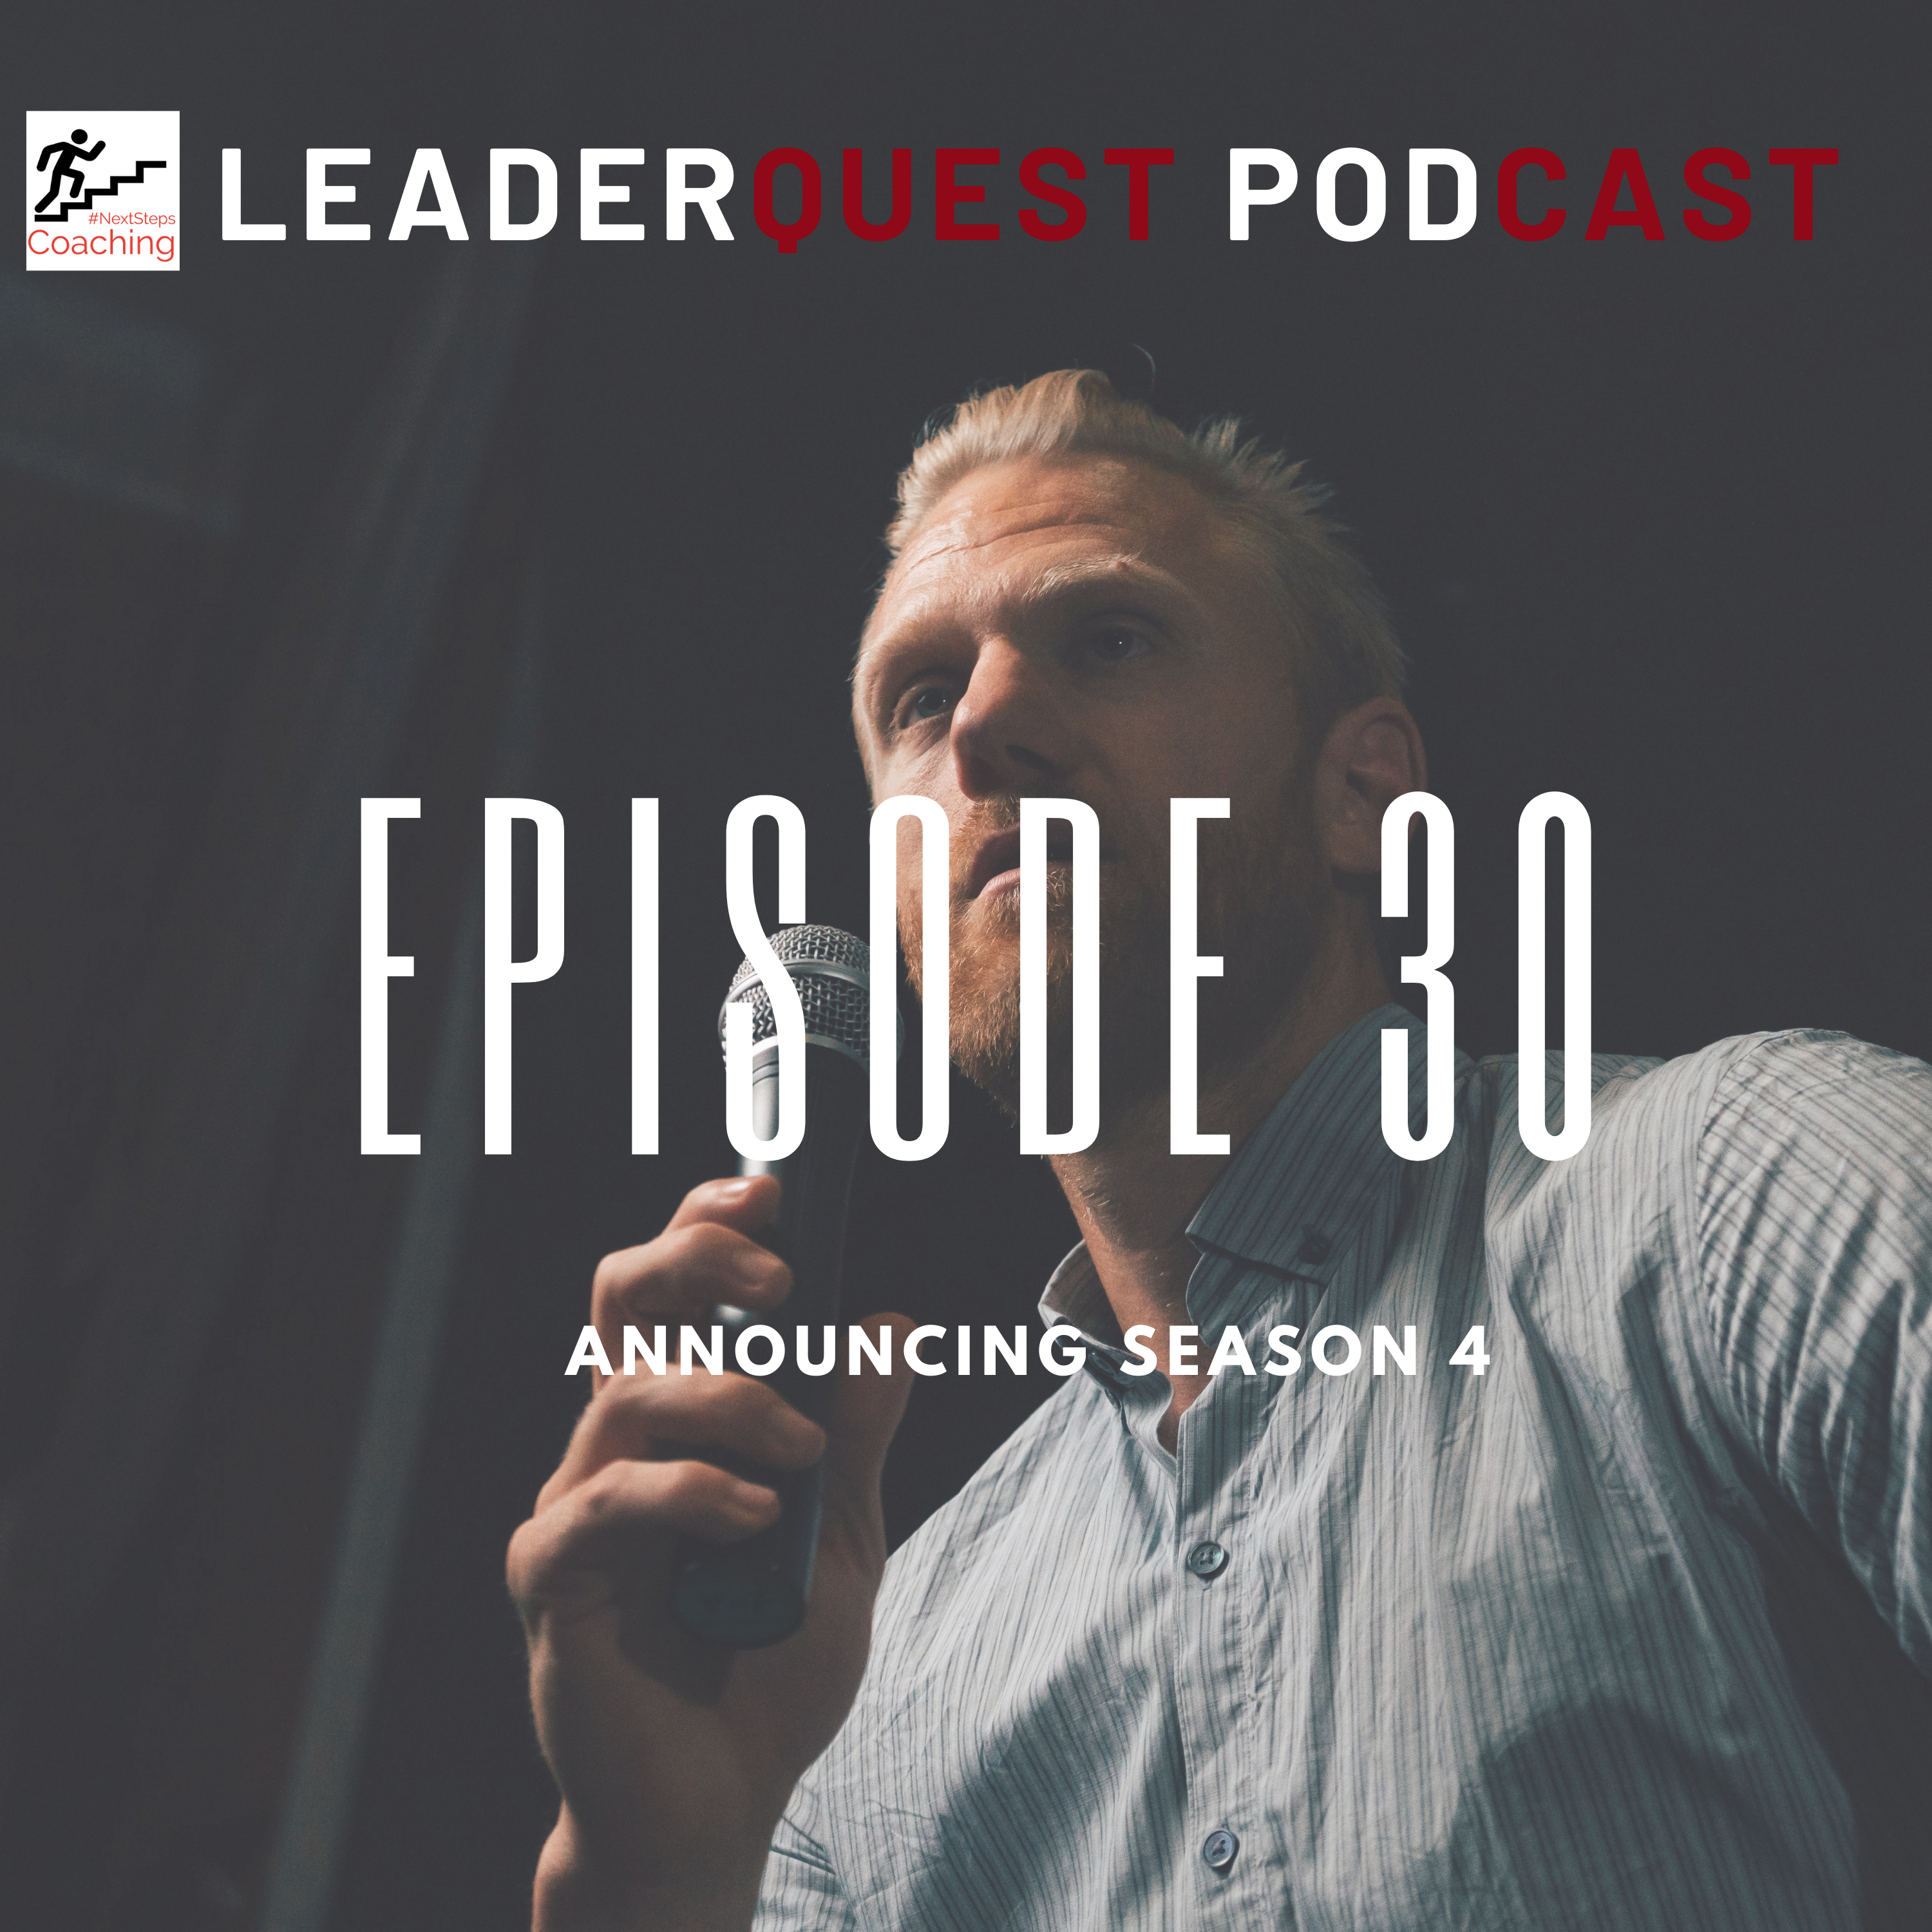 LeaderQuest Podcast Season 4 Introduction